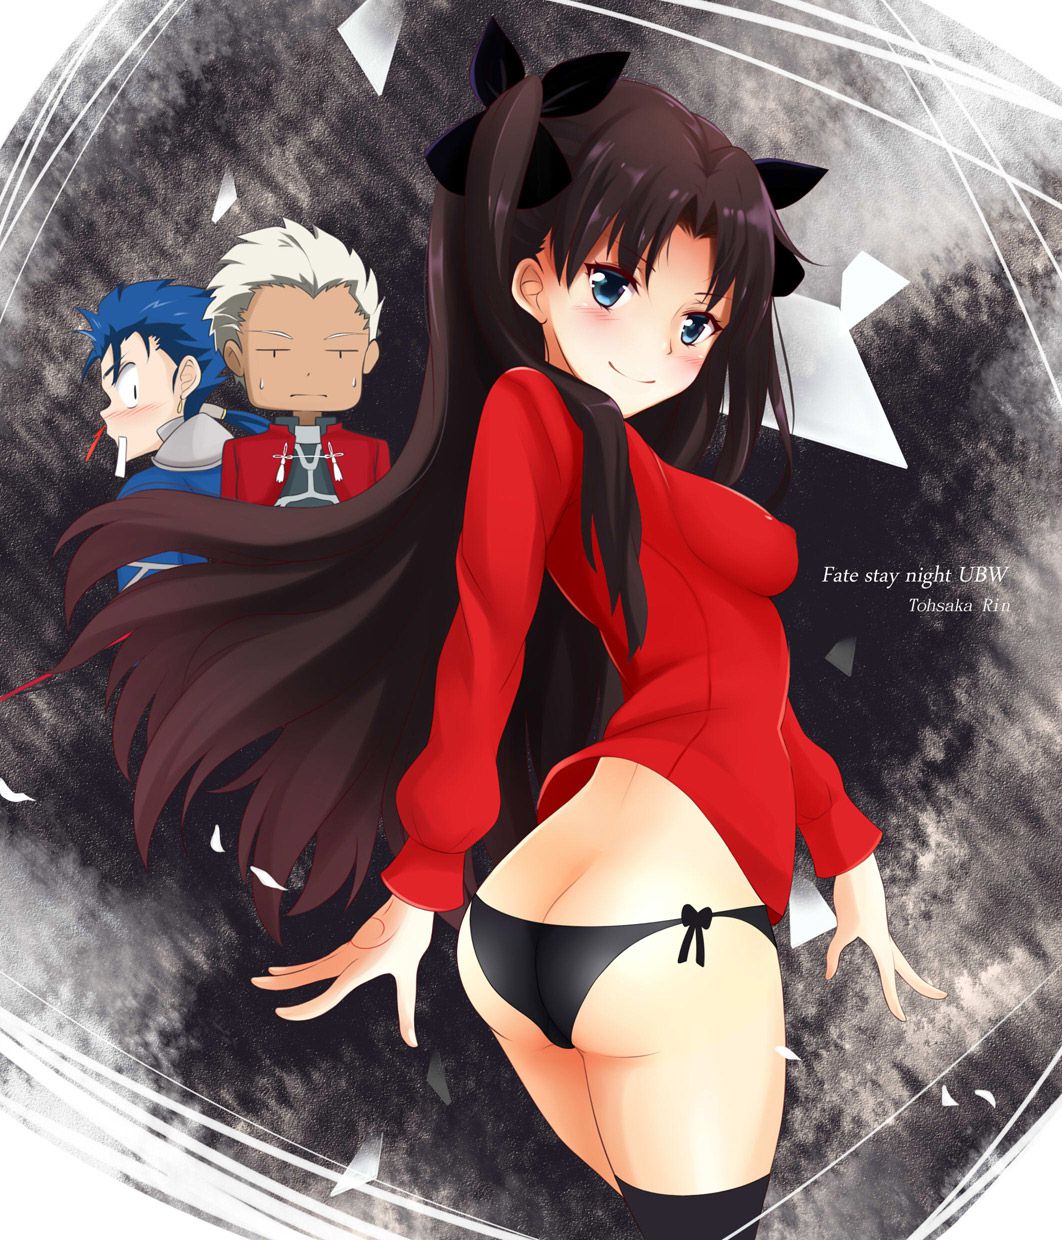 2D-fate/stay night tohsaka Rin-Chan prpr erotic pictures 68 photos 17